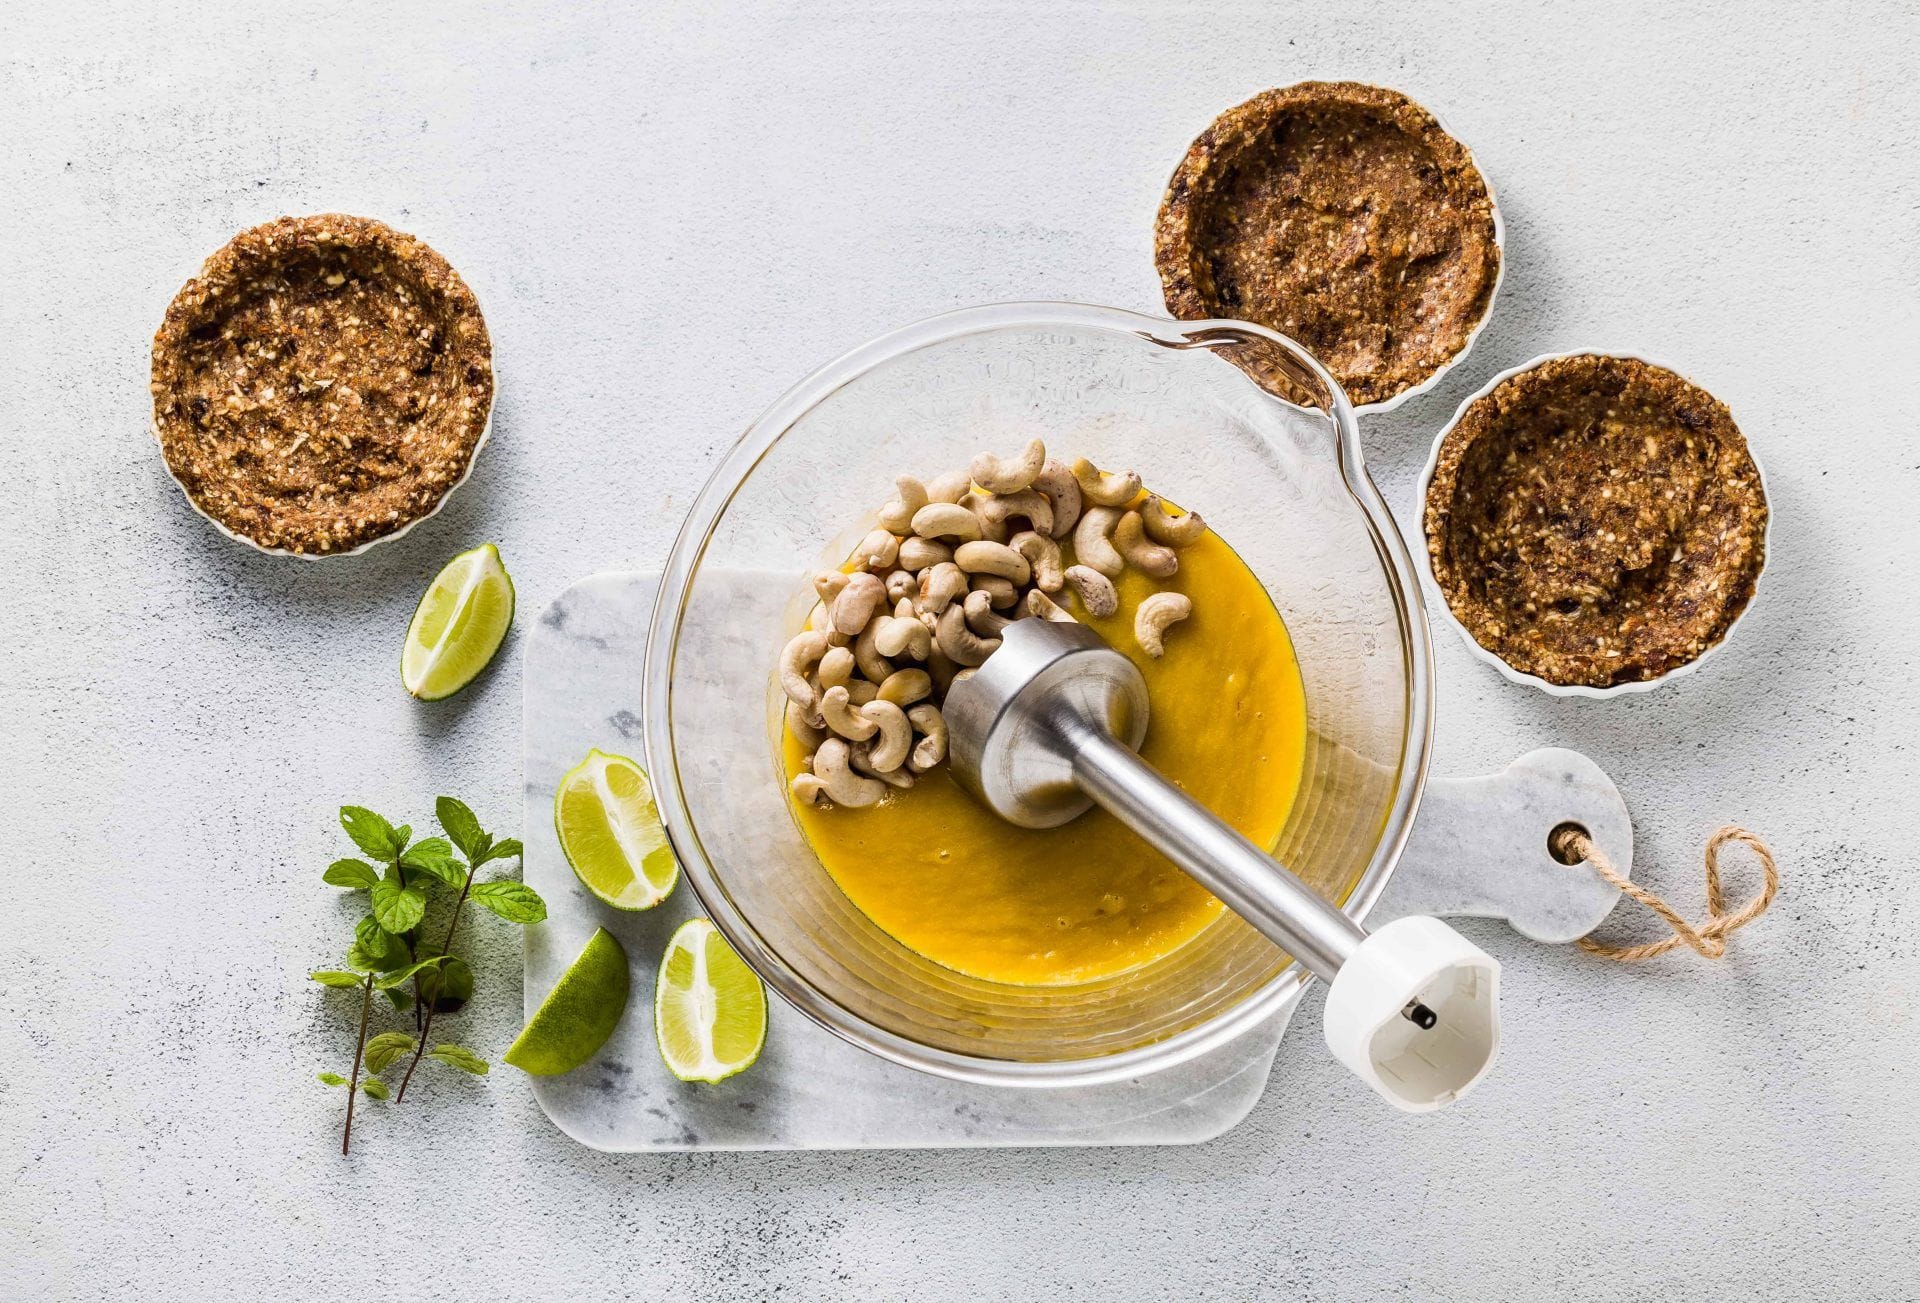 Preparation of vegan paleo cream from cashew nuts and mango puree for mini tarts made of nuts and dates with battery operated immersionblender